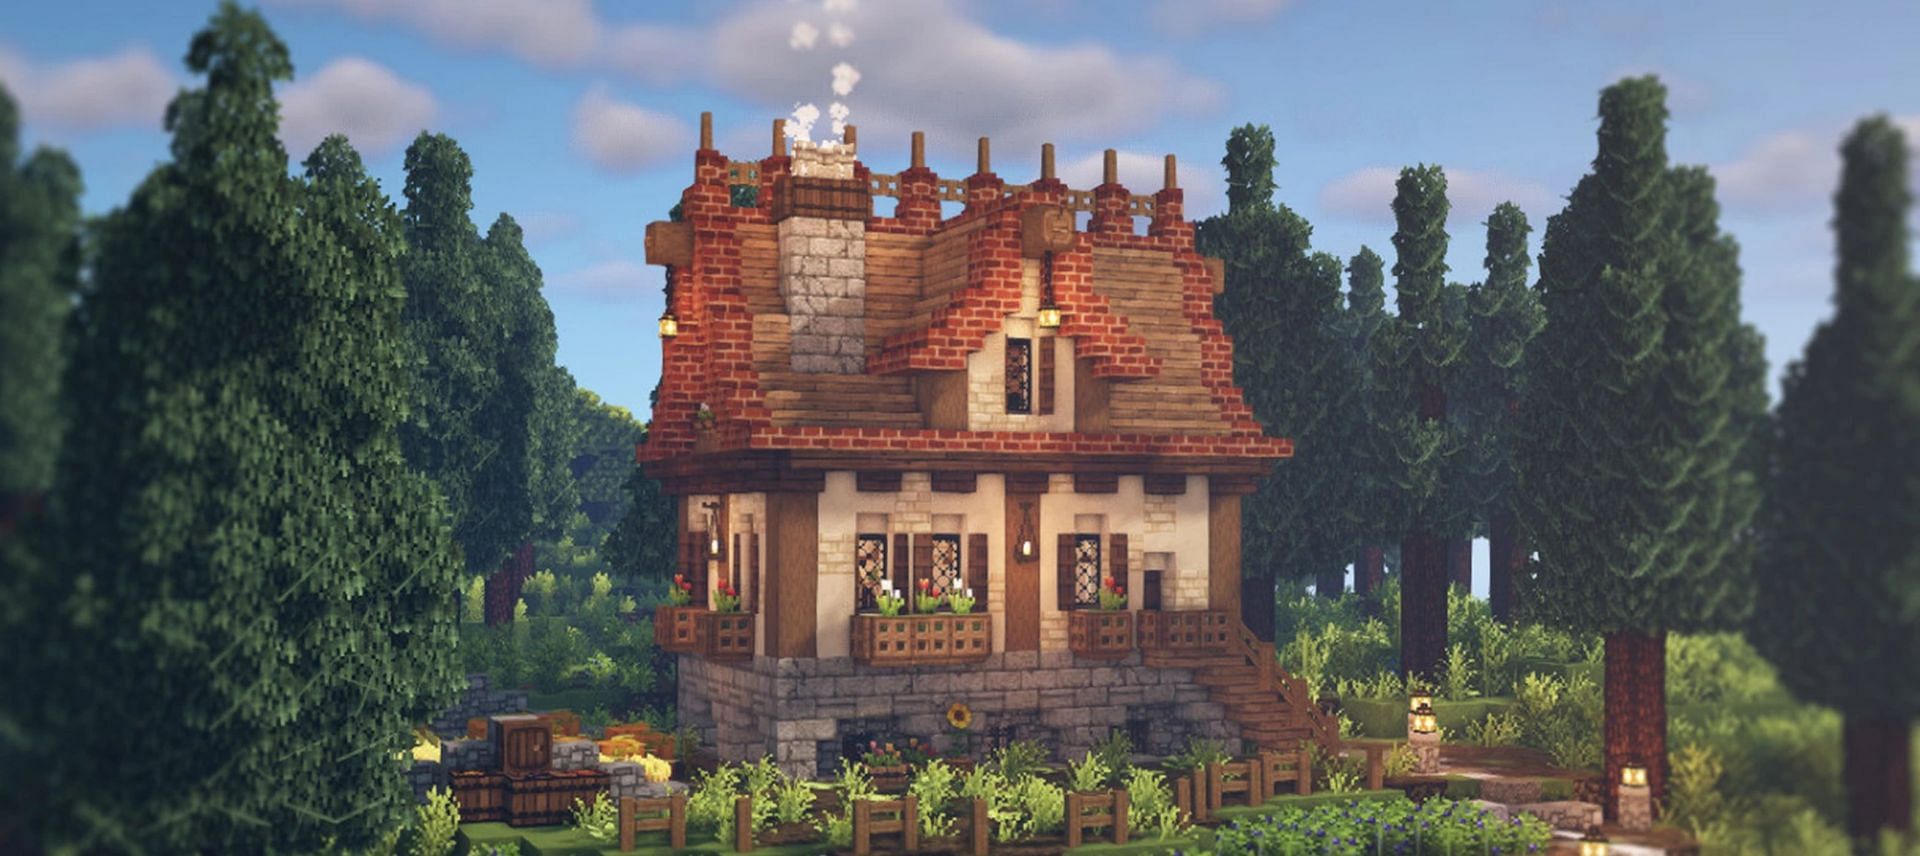 Cottages can be both modest or opulent (Image via Planet Minecraft user Beeswithmoss)